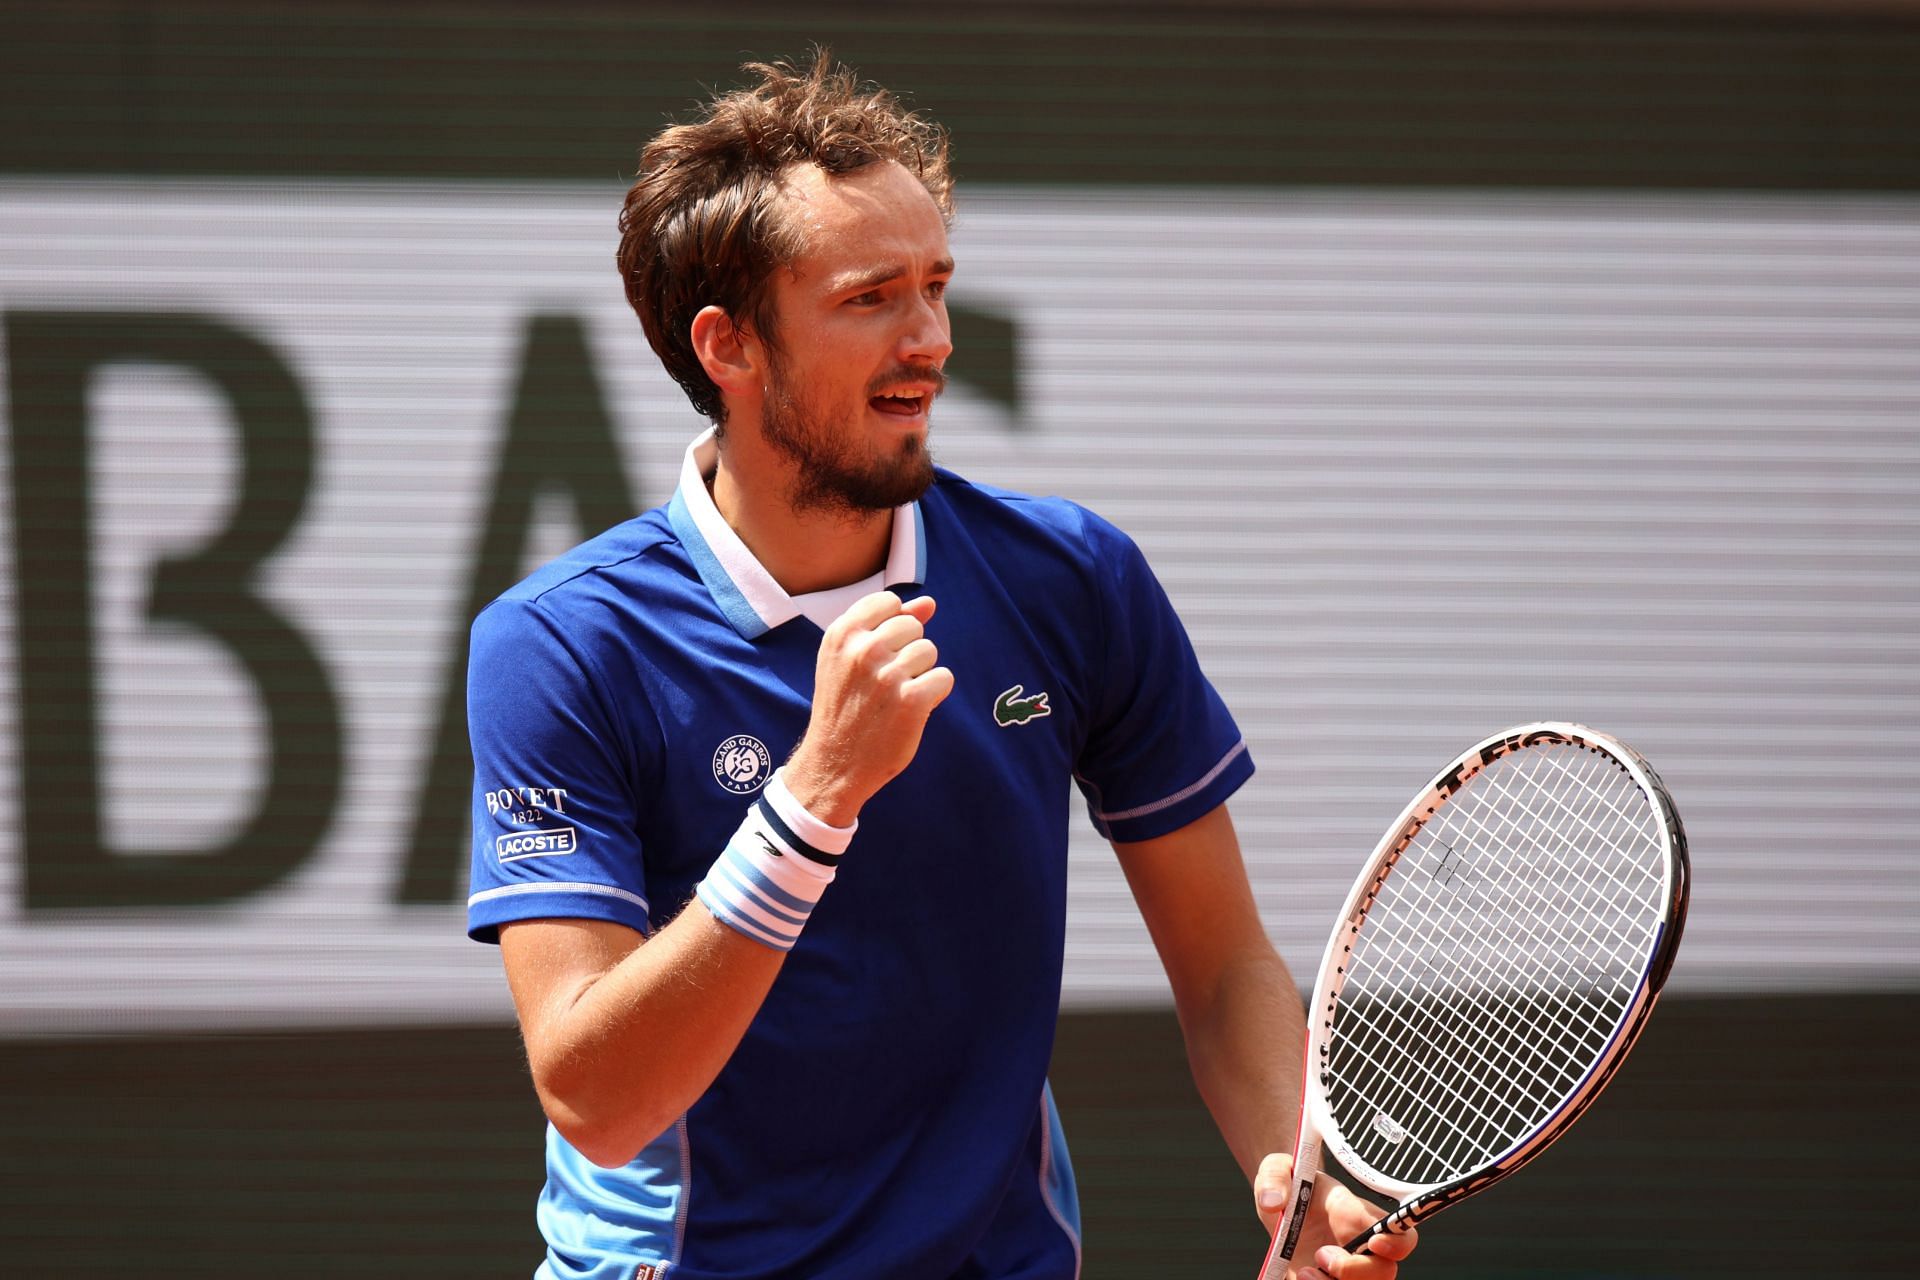 Daniil Medvedev will be keen to get one step closer to a first title in 2022